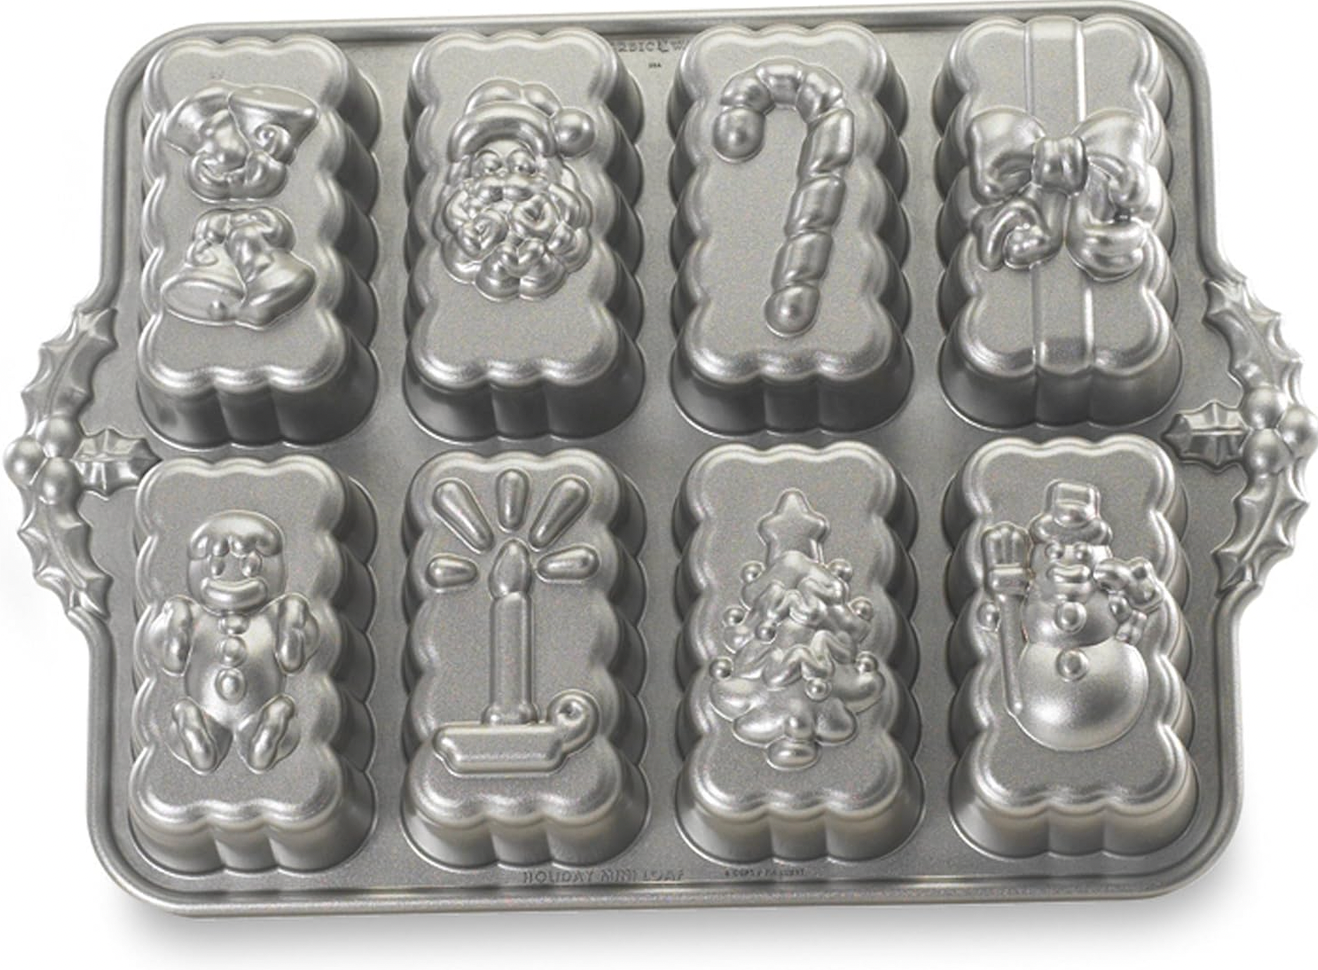 Nordic Ware 6-Cup Harvest Mini Loaf Pan -New